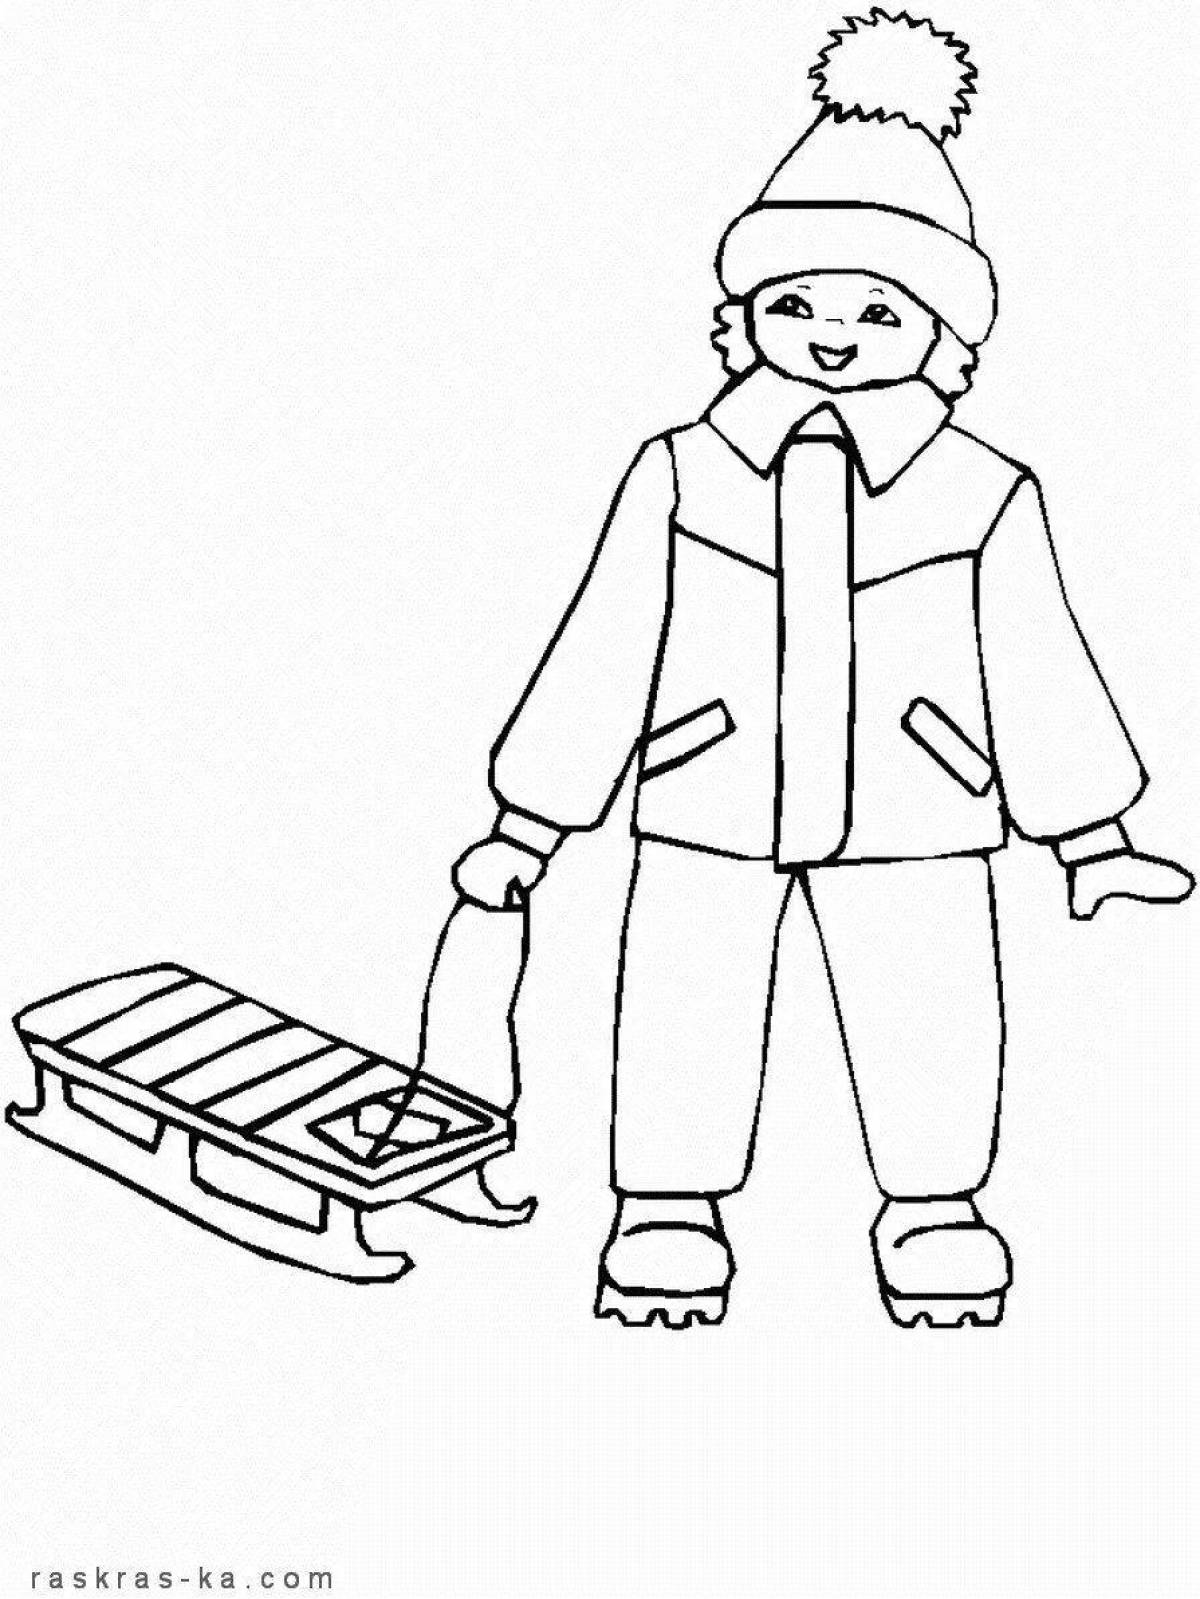 Fantastic winter clothes coloring book for 5-6 year olds